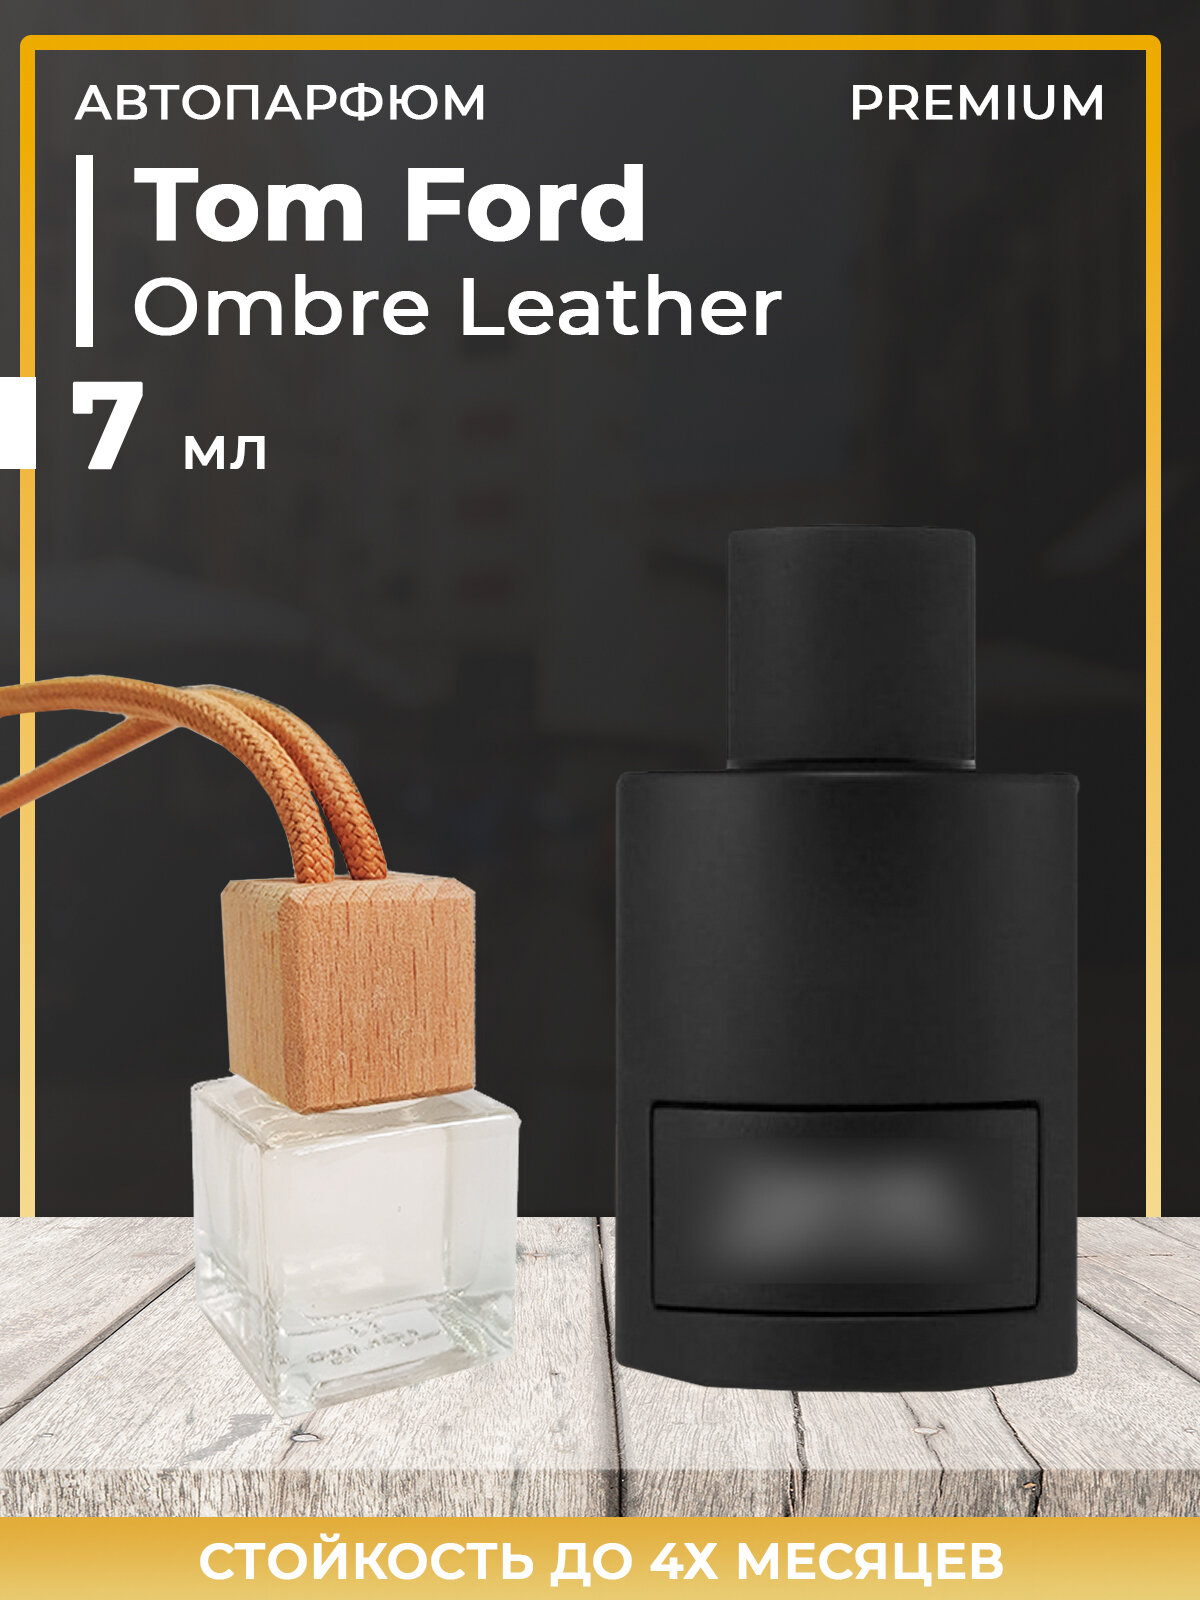 Автопарфюм Tom Ford Ombre Leather